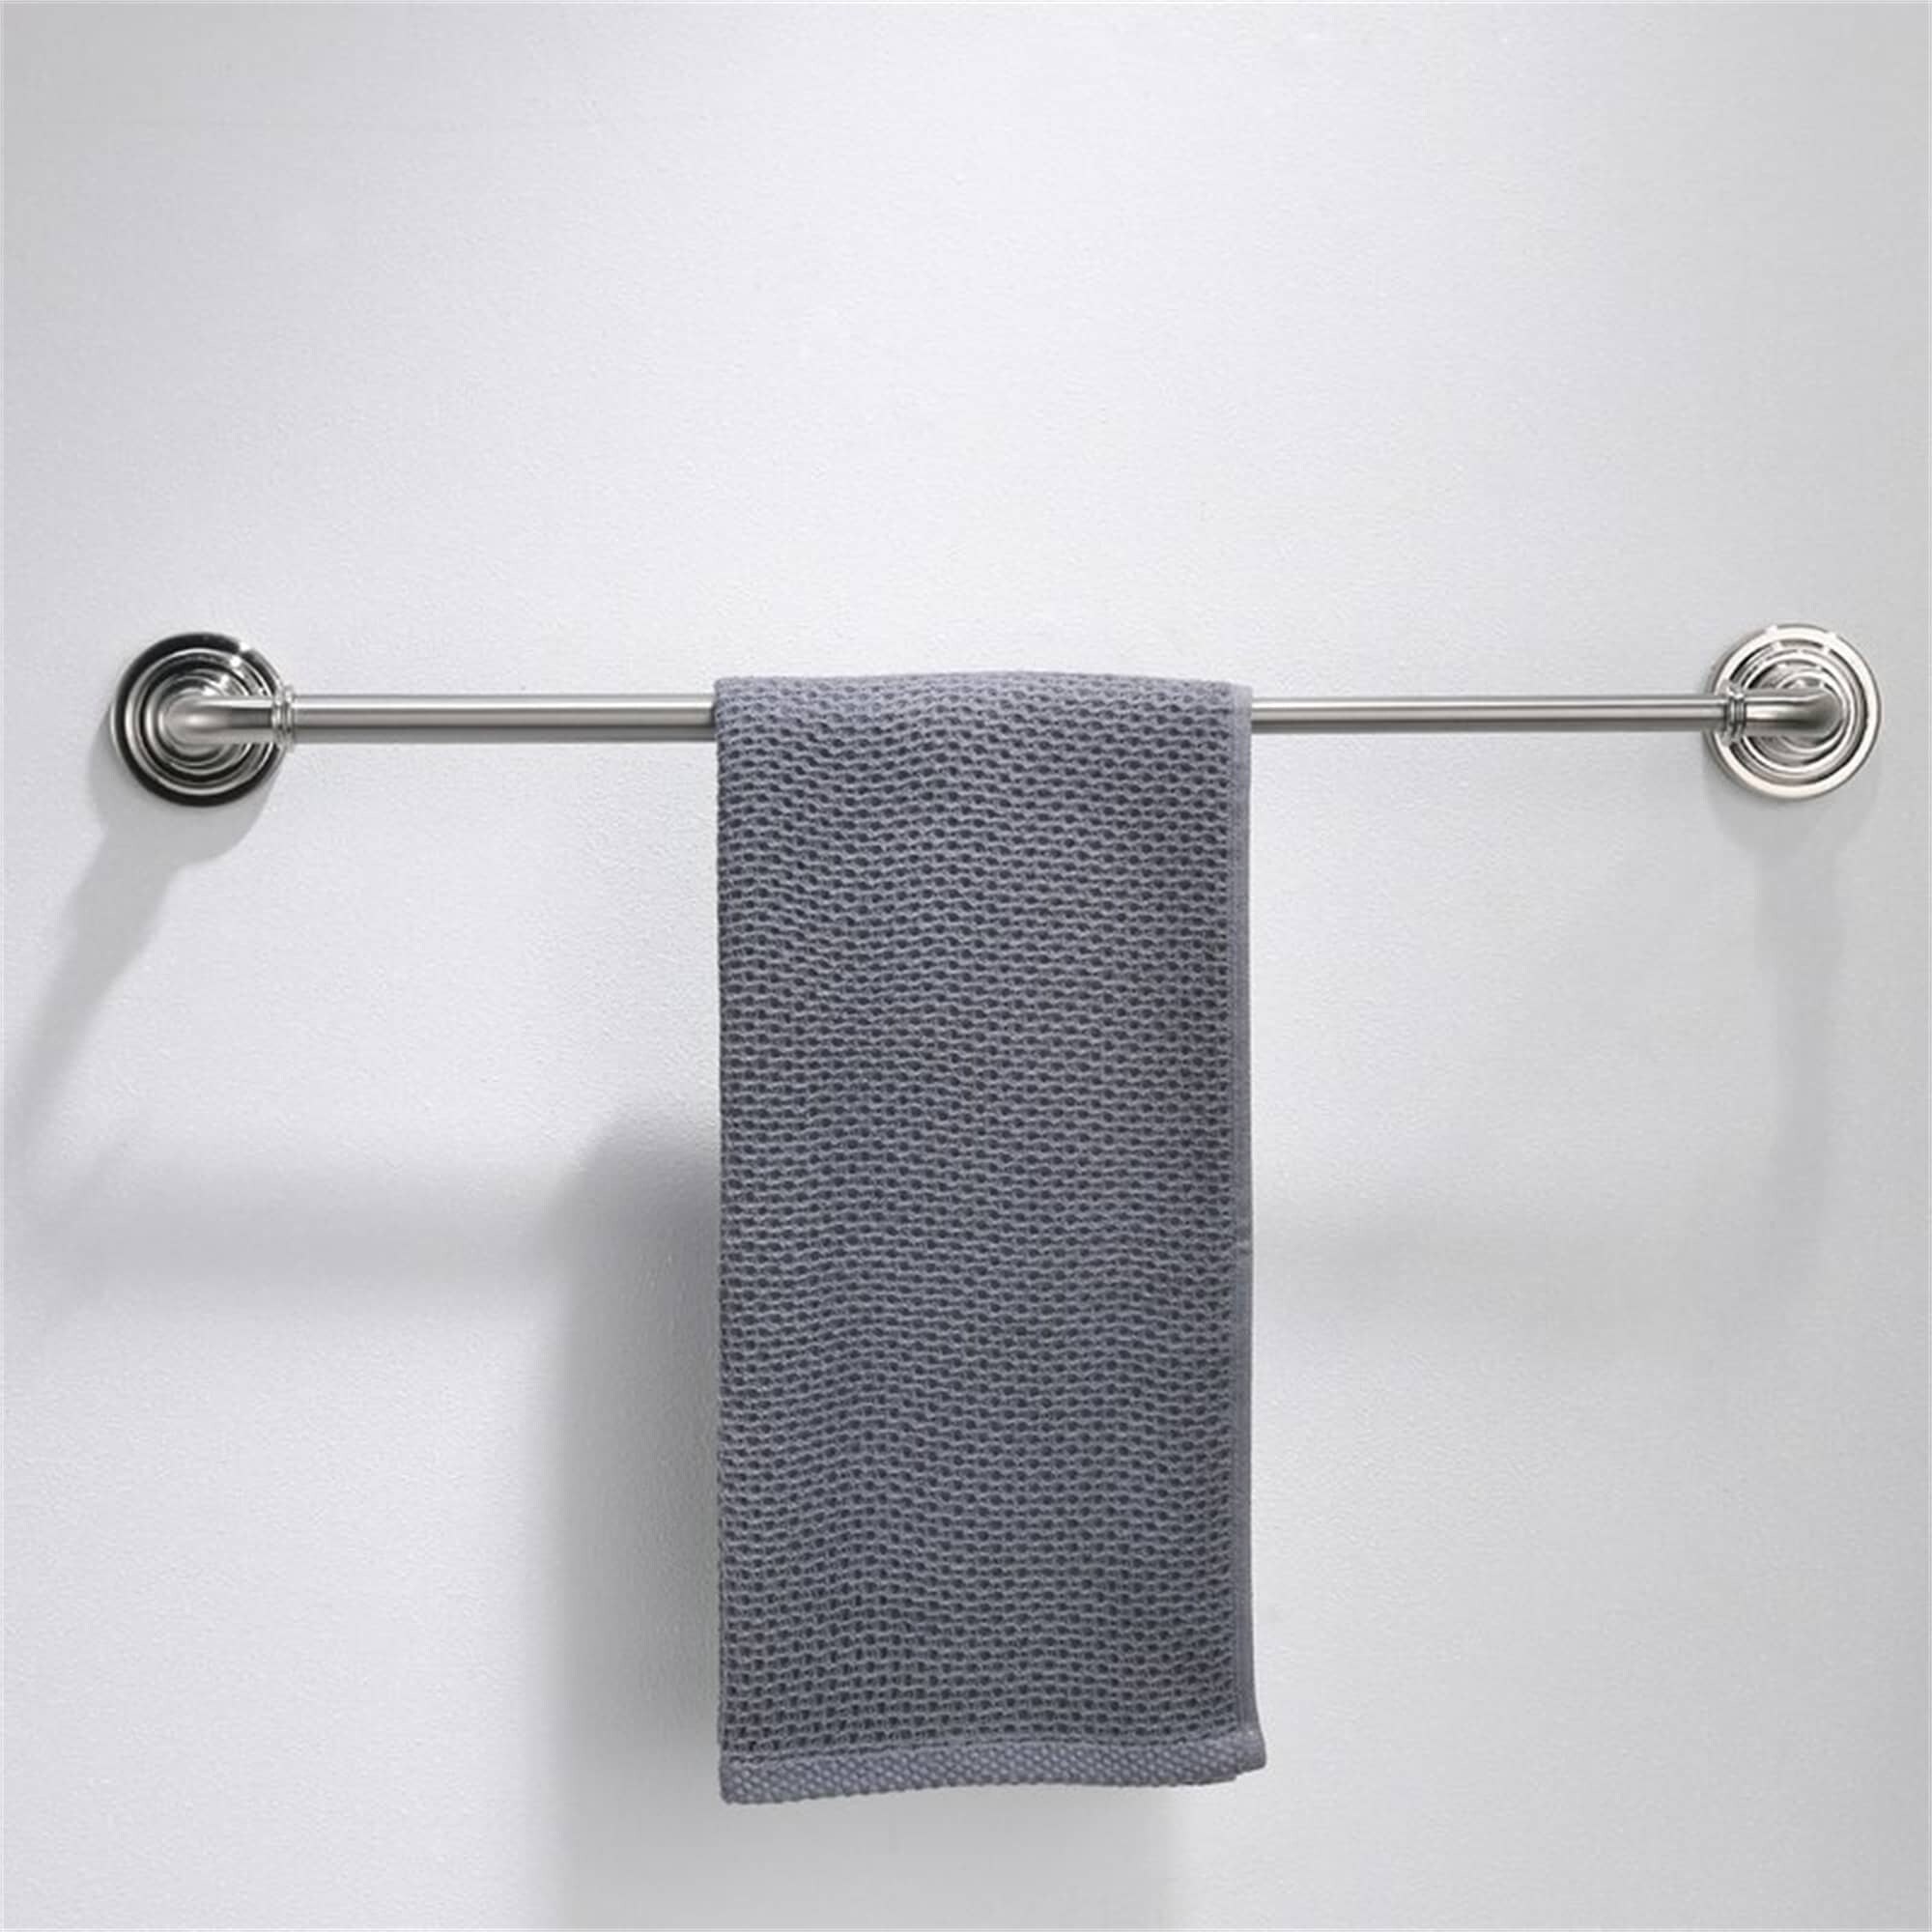 https://ak1.ostkcdn.com/images/products/is/images/direct/e836565c25702e05044a685f55a5e567cf8c2452/5-Piece-Bathroom-Hardware-Set-Towel-Bar-Toilet-Paper-Holder-Robe-Hooks-Stainless-Steel-Wall-Mounted-Adjustable-Accessory-Set.jpg